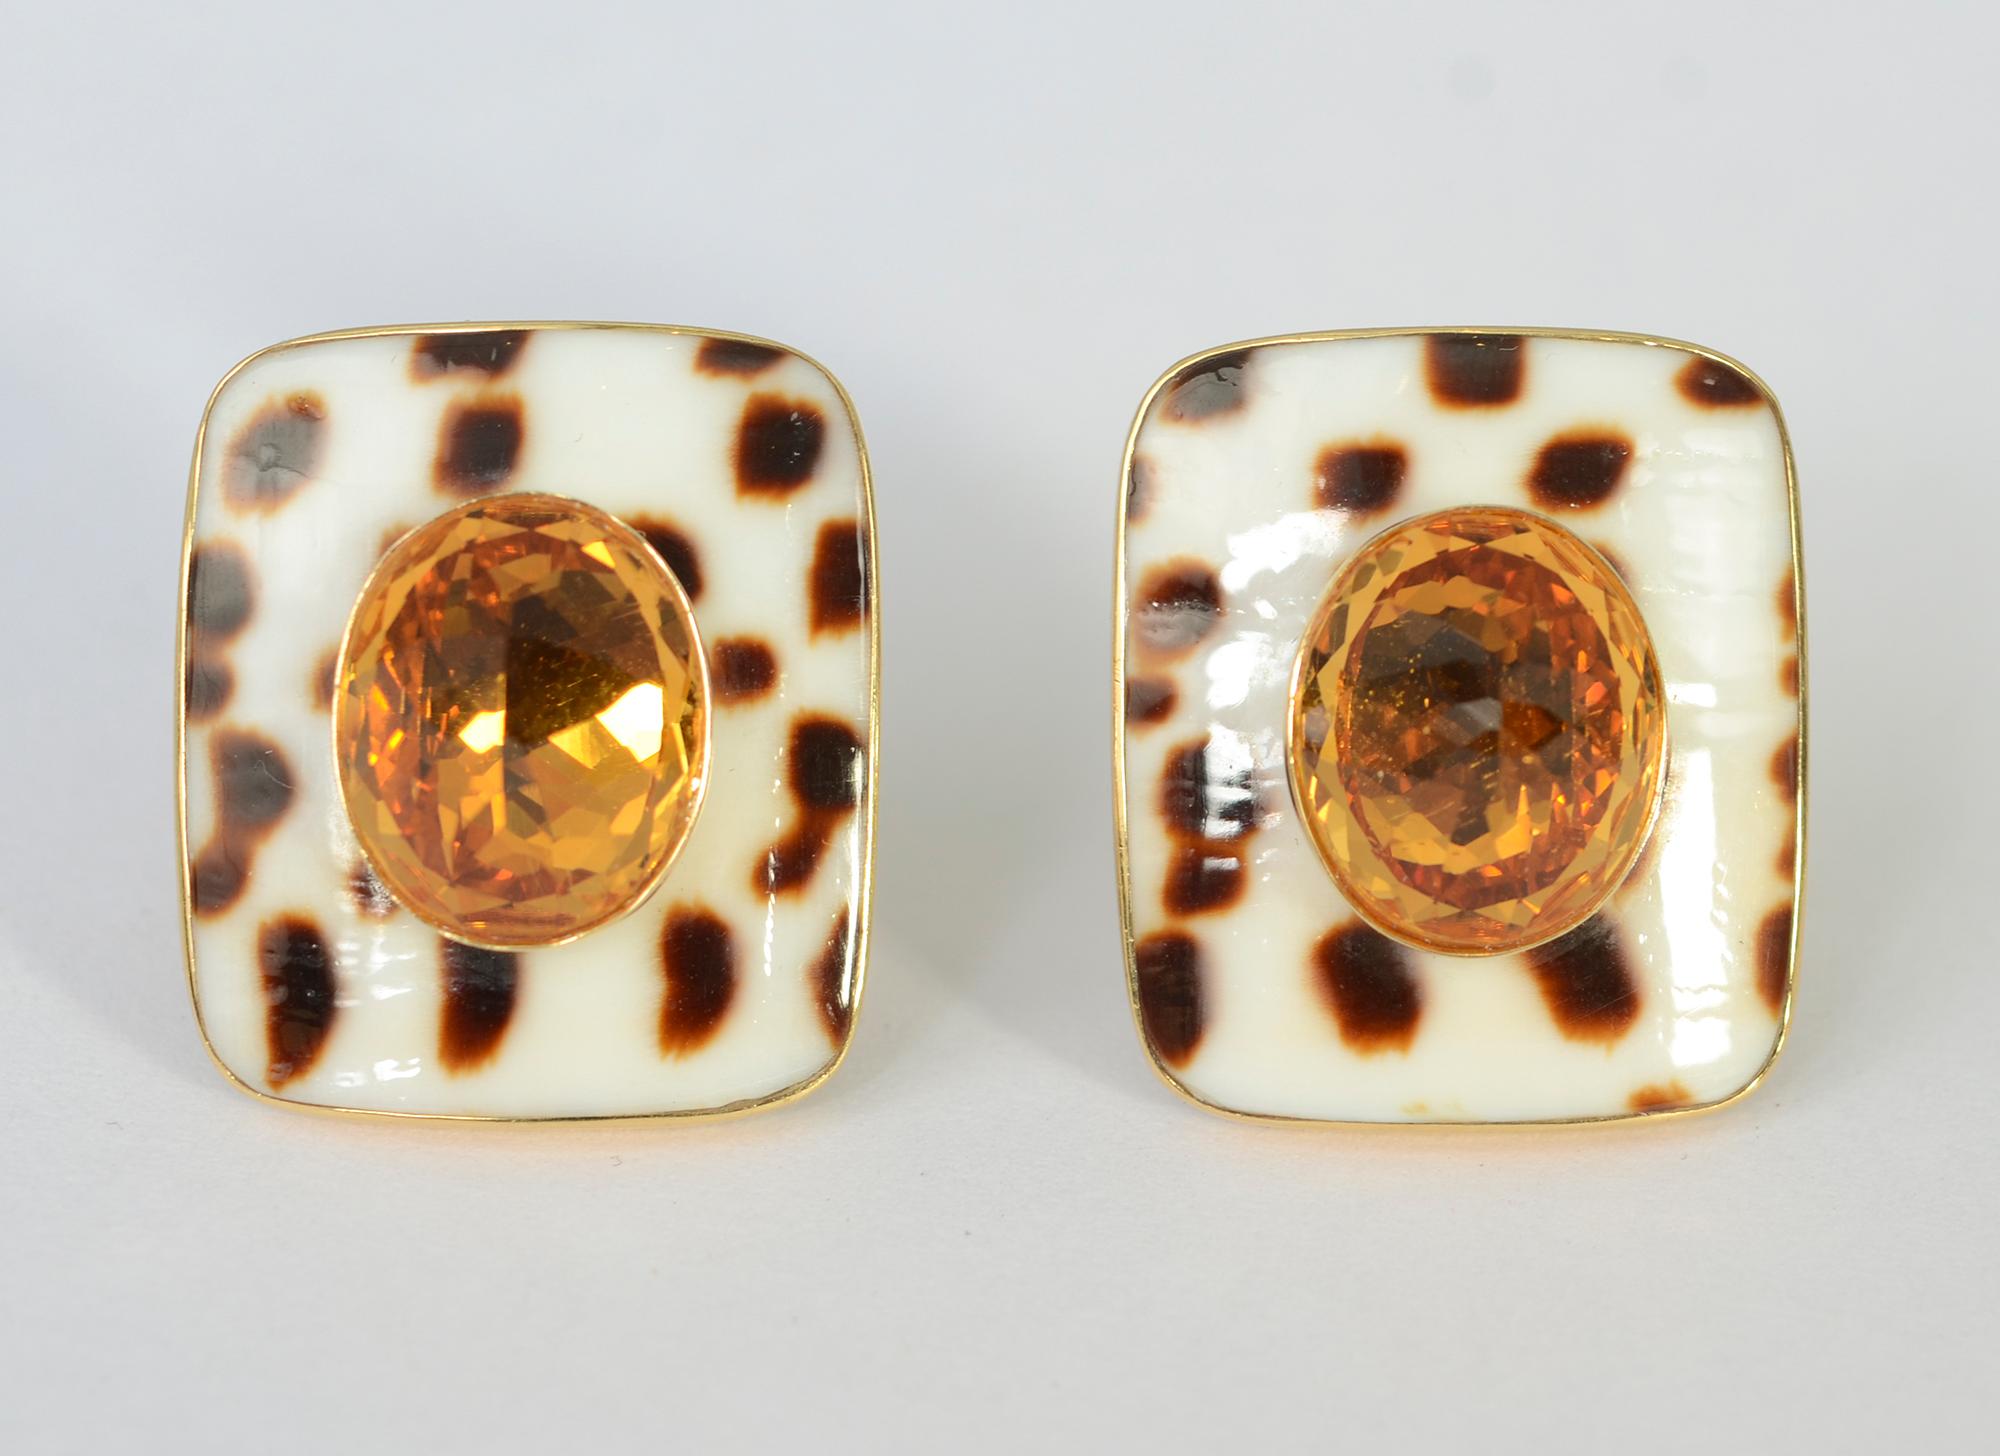 Faceted citrines blend beautifully with the brown and white patterning of the shell ground in these earrings by Trianon. The brown patterning is irregular because it is natural shell. The earrings are 3/4